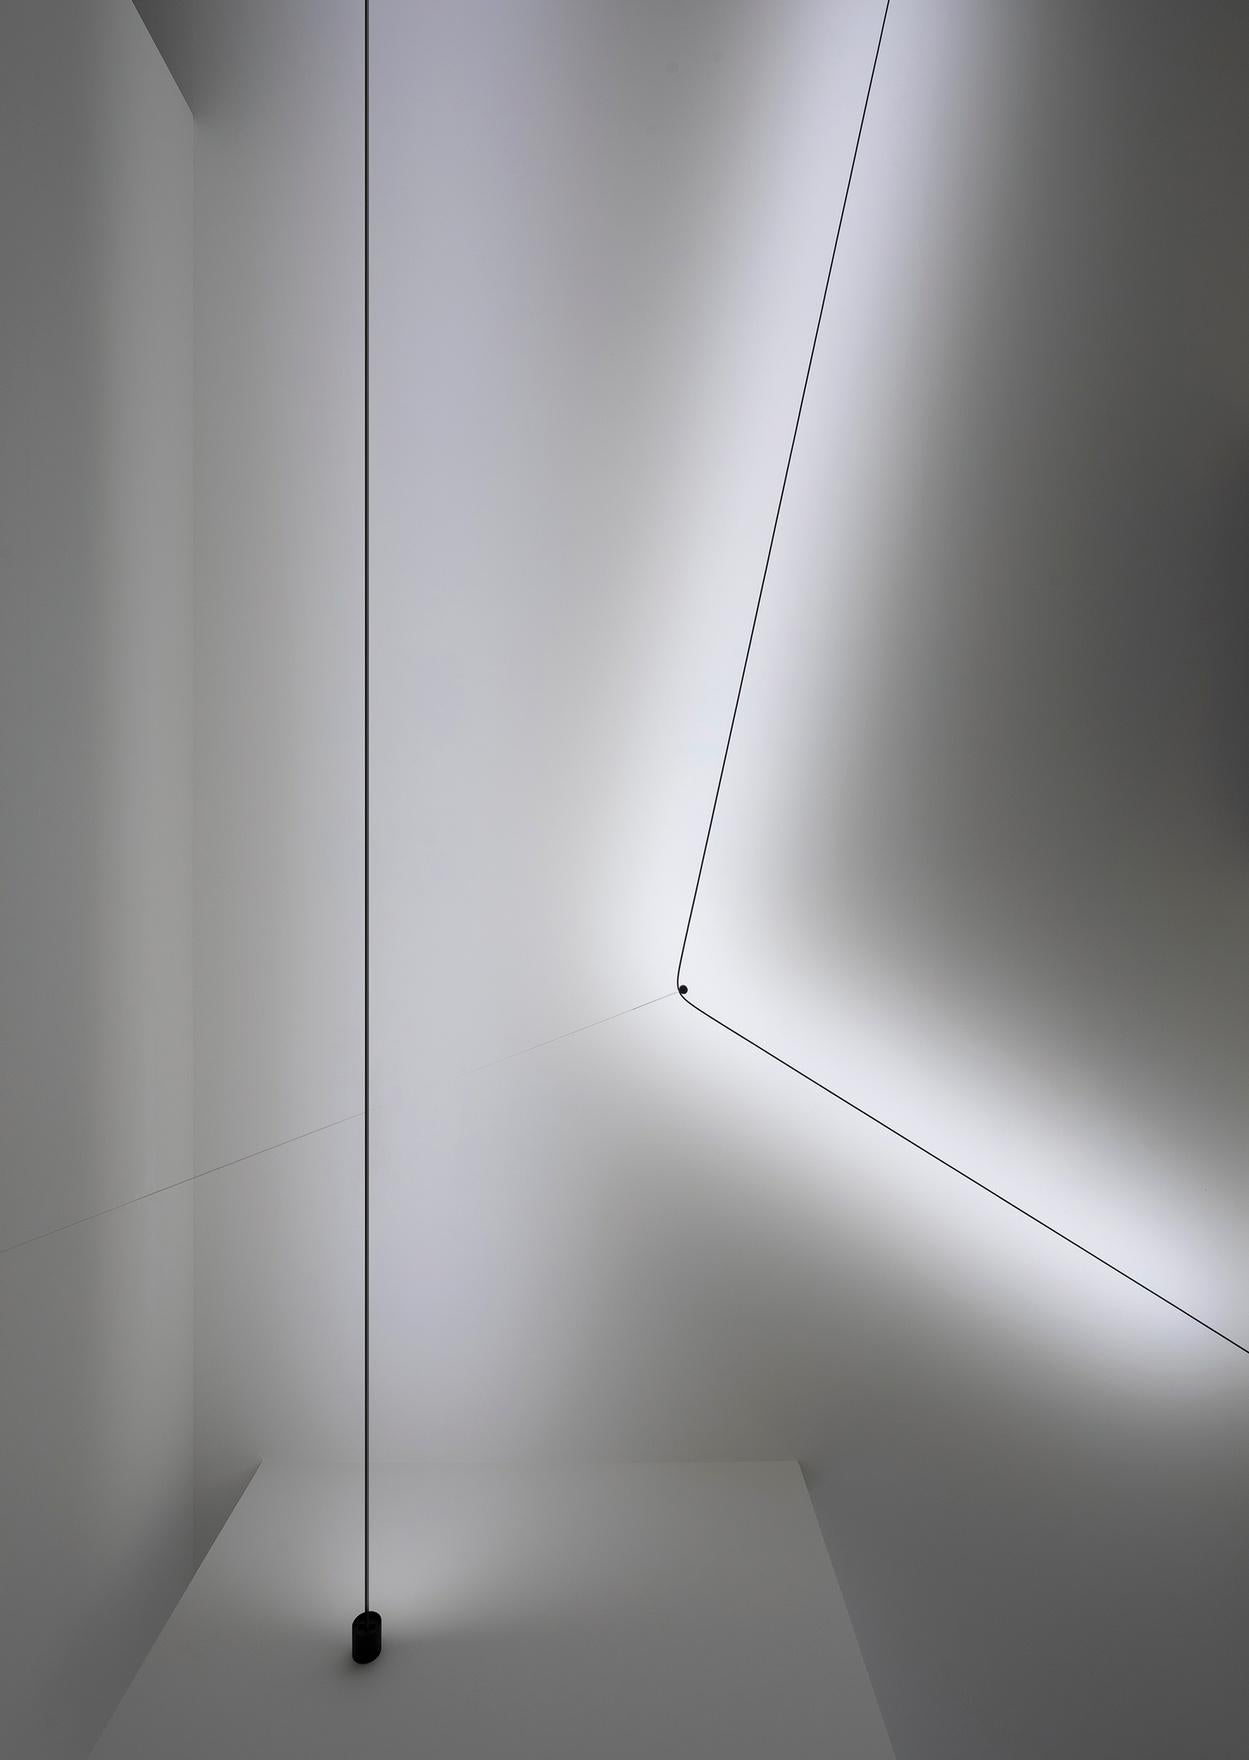 Utopia is a project on the limit state of light, the research for the minimum
dimension necessary for pure and essential lighting.
It represents full flexibility, in both its design and its light control.
The light strip reaches into space, bending,